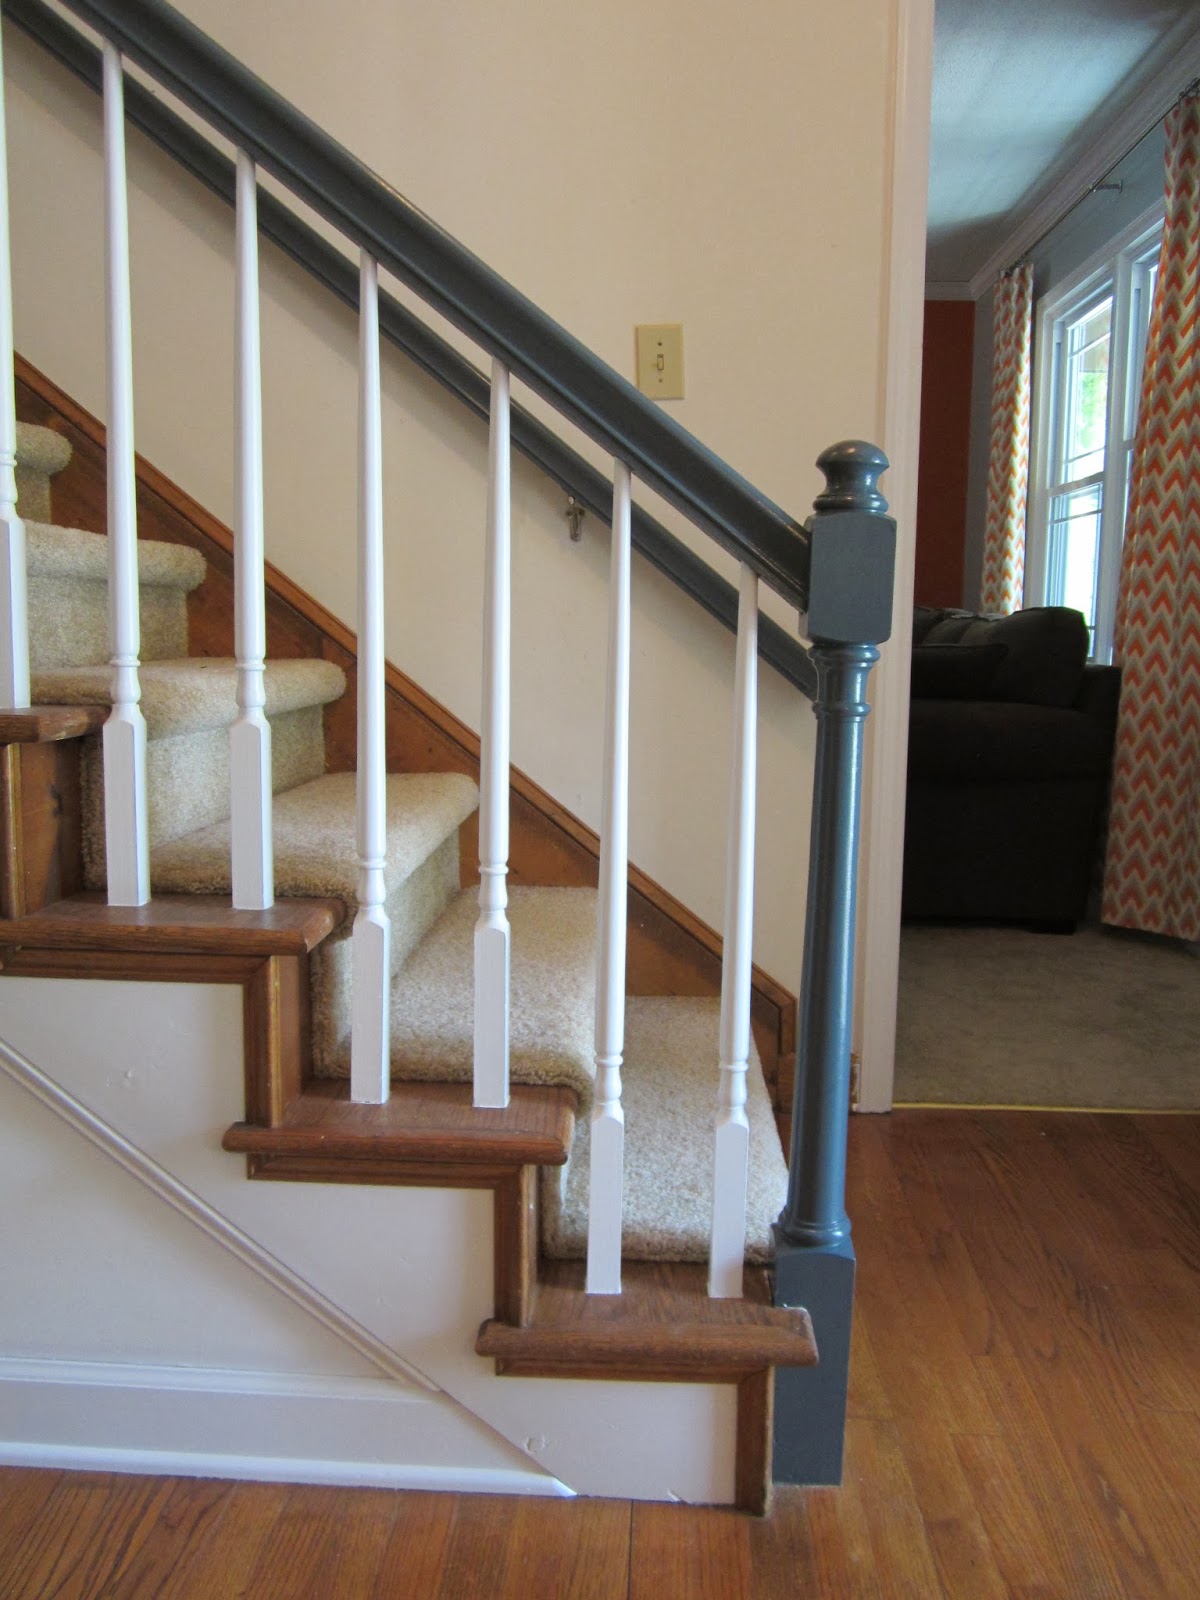 The Amberican Dream: Banister Beautification